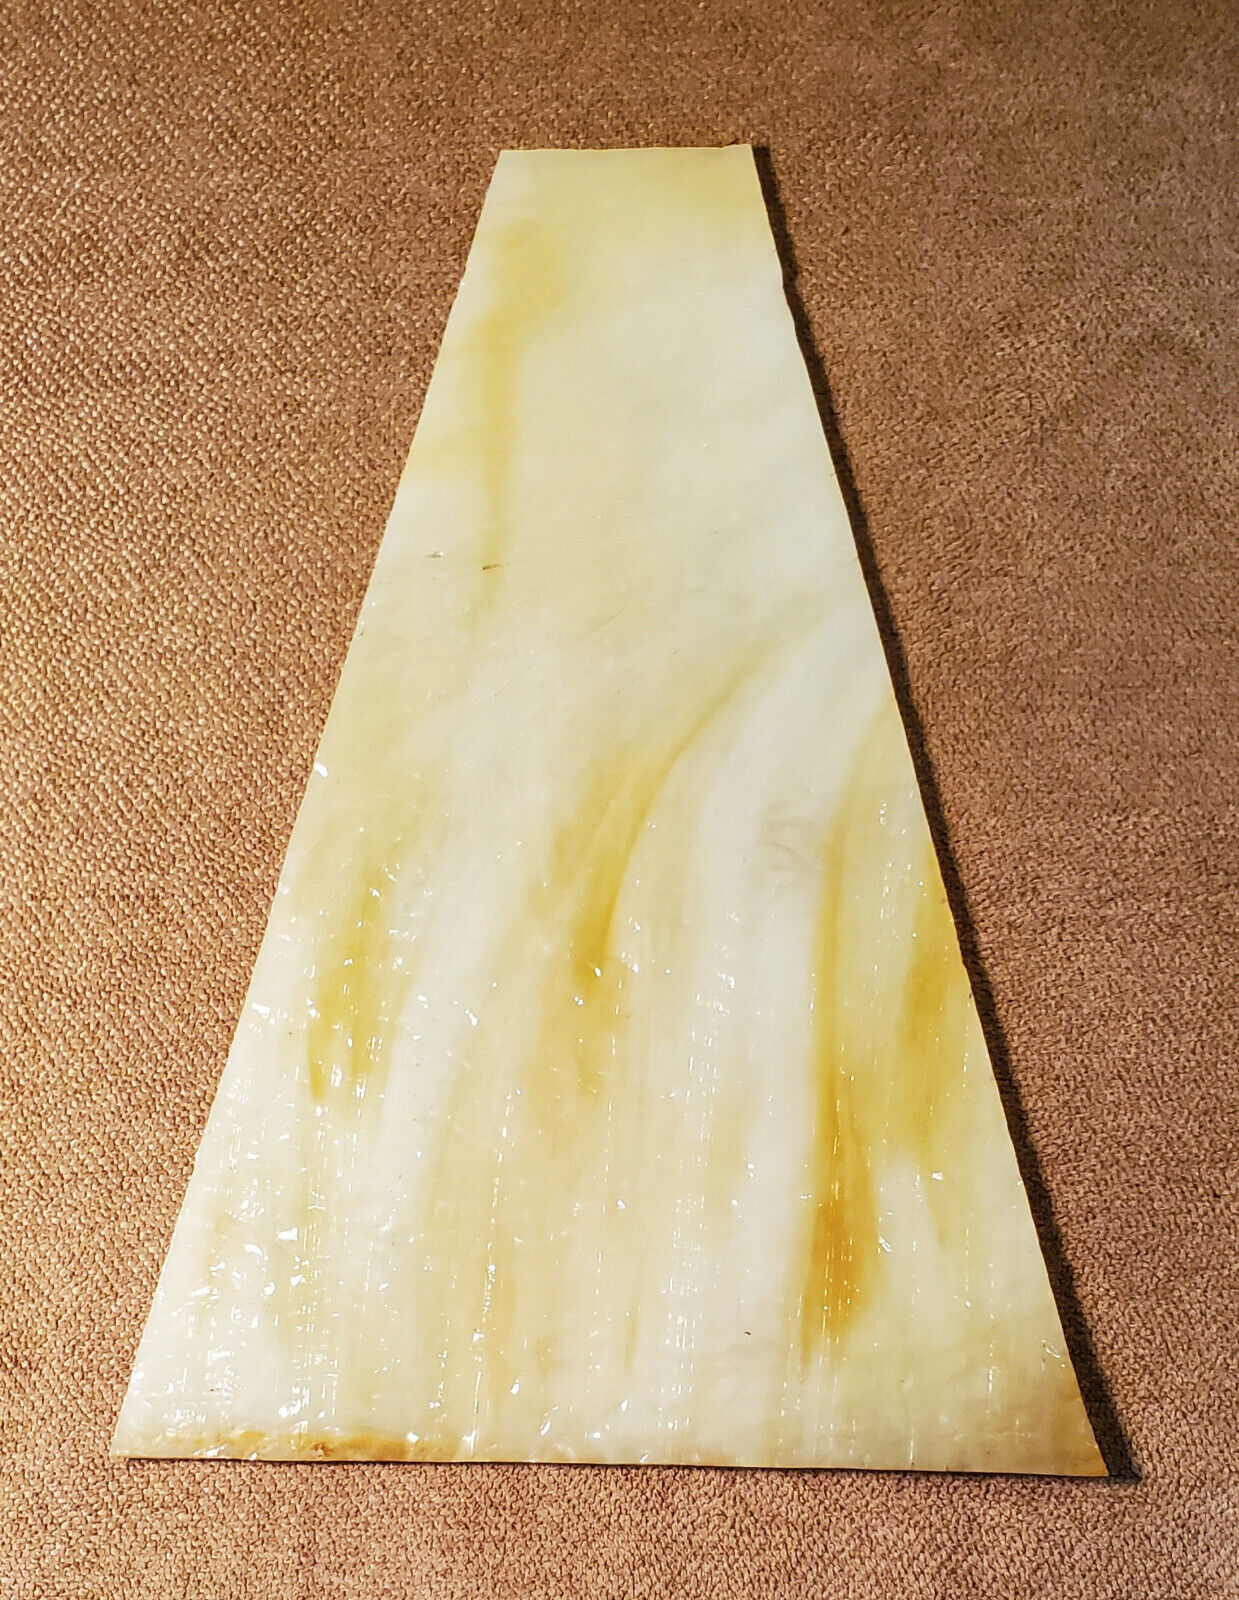 Antique Quadrilateral Slag Glass Caramel Marbled Replacement Piece